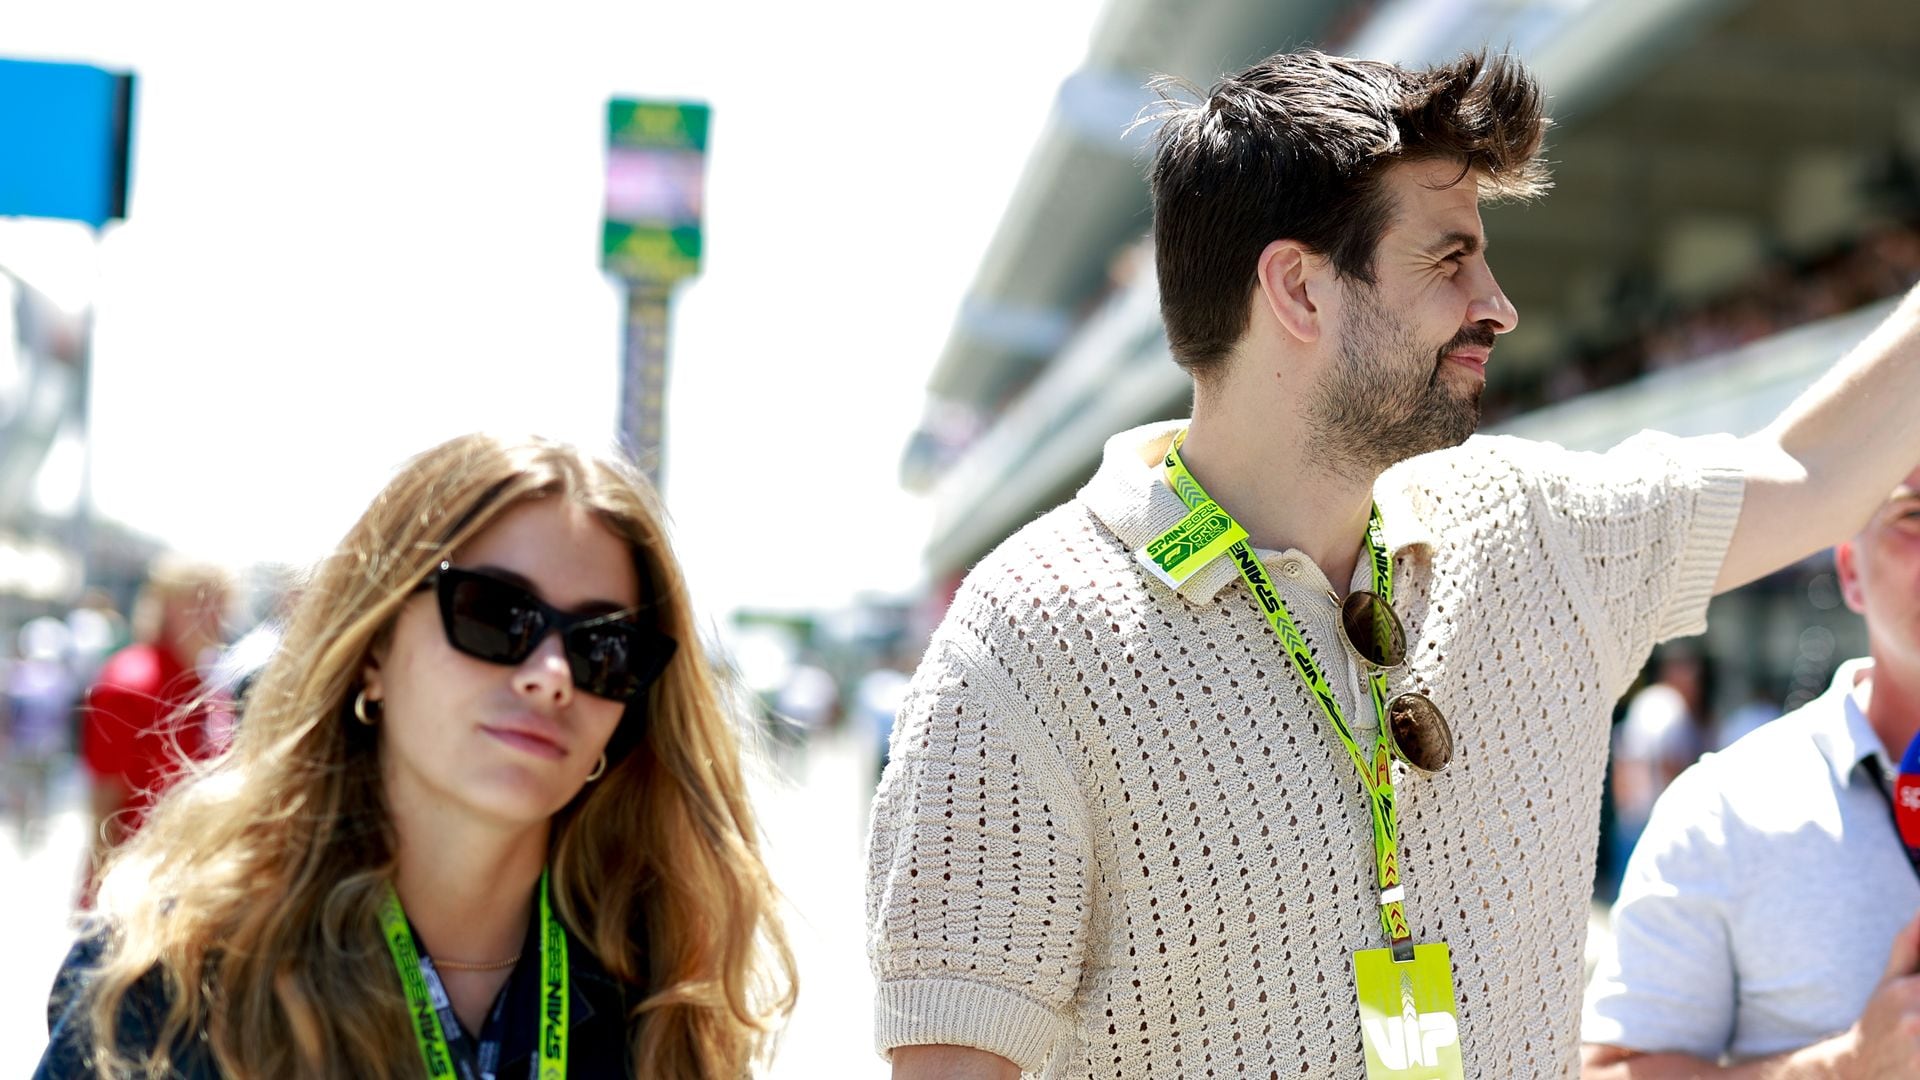 Gerard Pique and Clara Chia reappear after losing their lawsuit